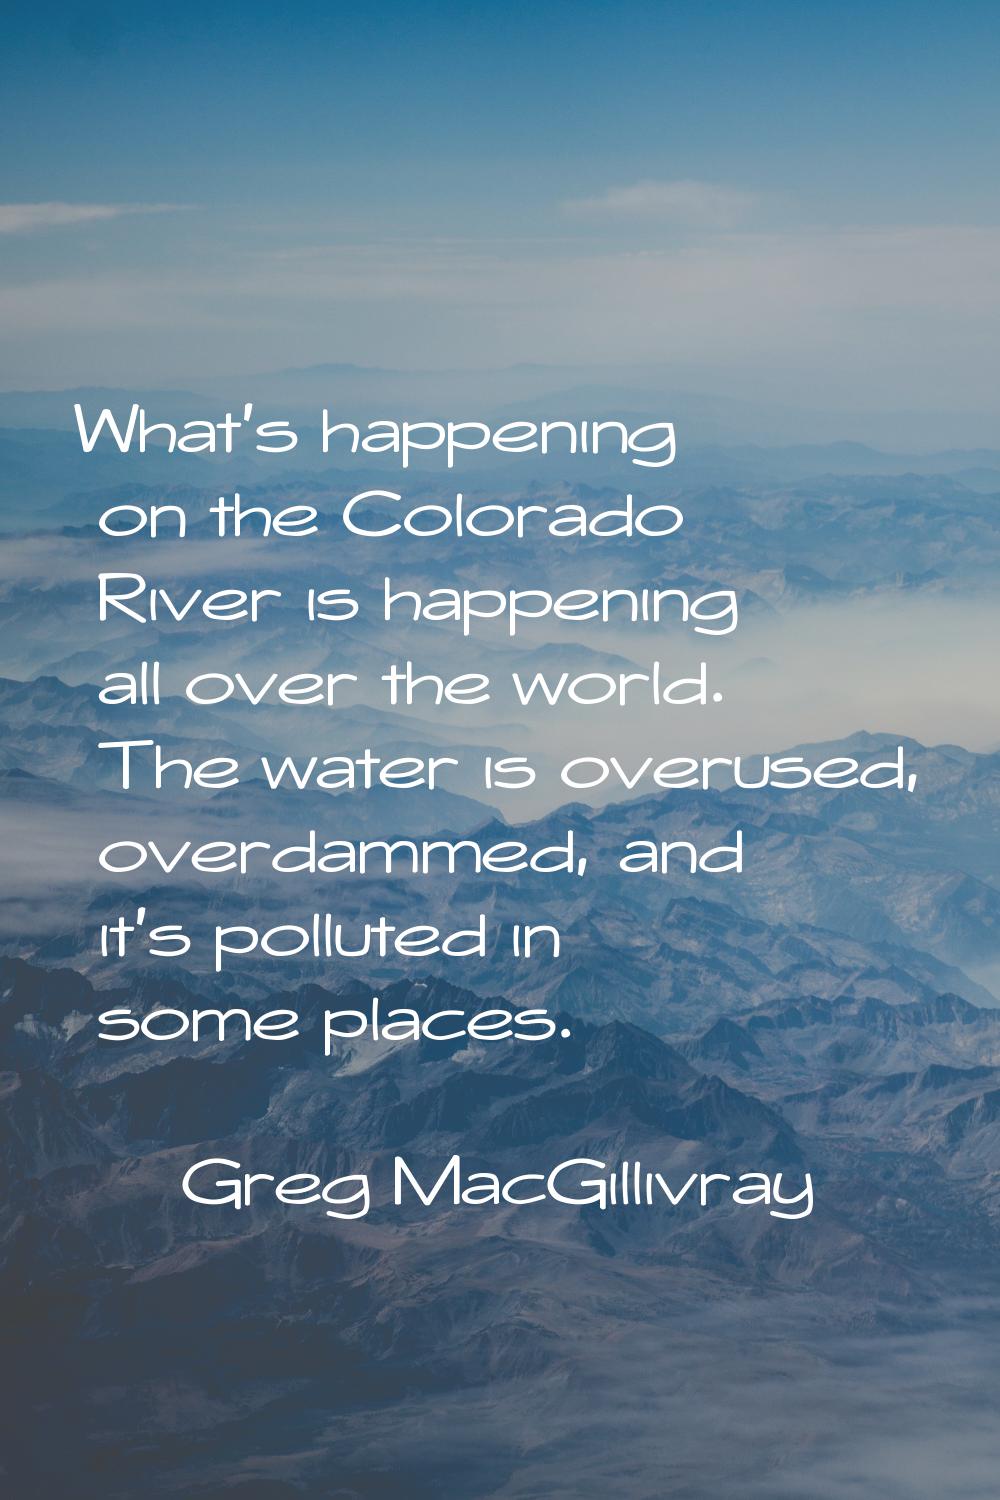 What's happening on the Colorado River is happening all over the world. The water is overused, over